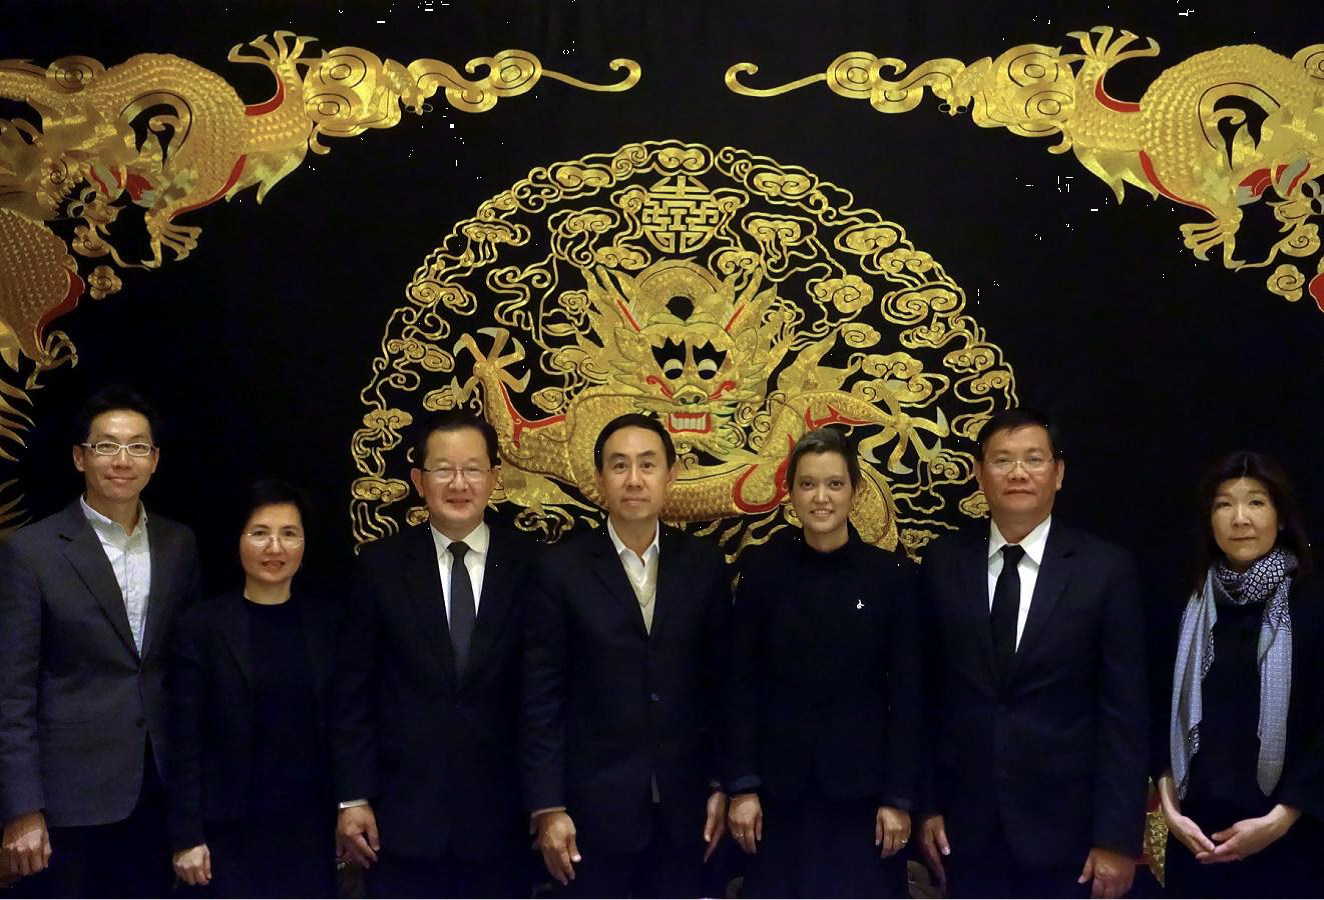 EXIM Thailand Visits Royal Thai Embassy, Beijing to Promote Thai Trade and Investment in China